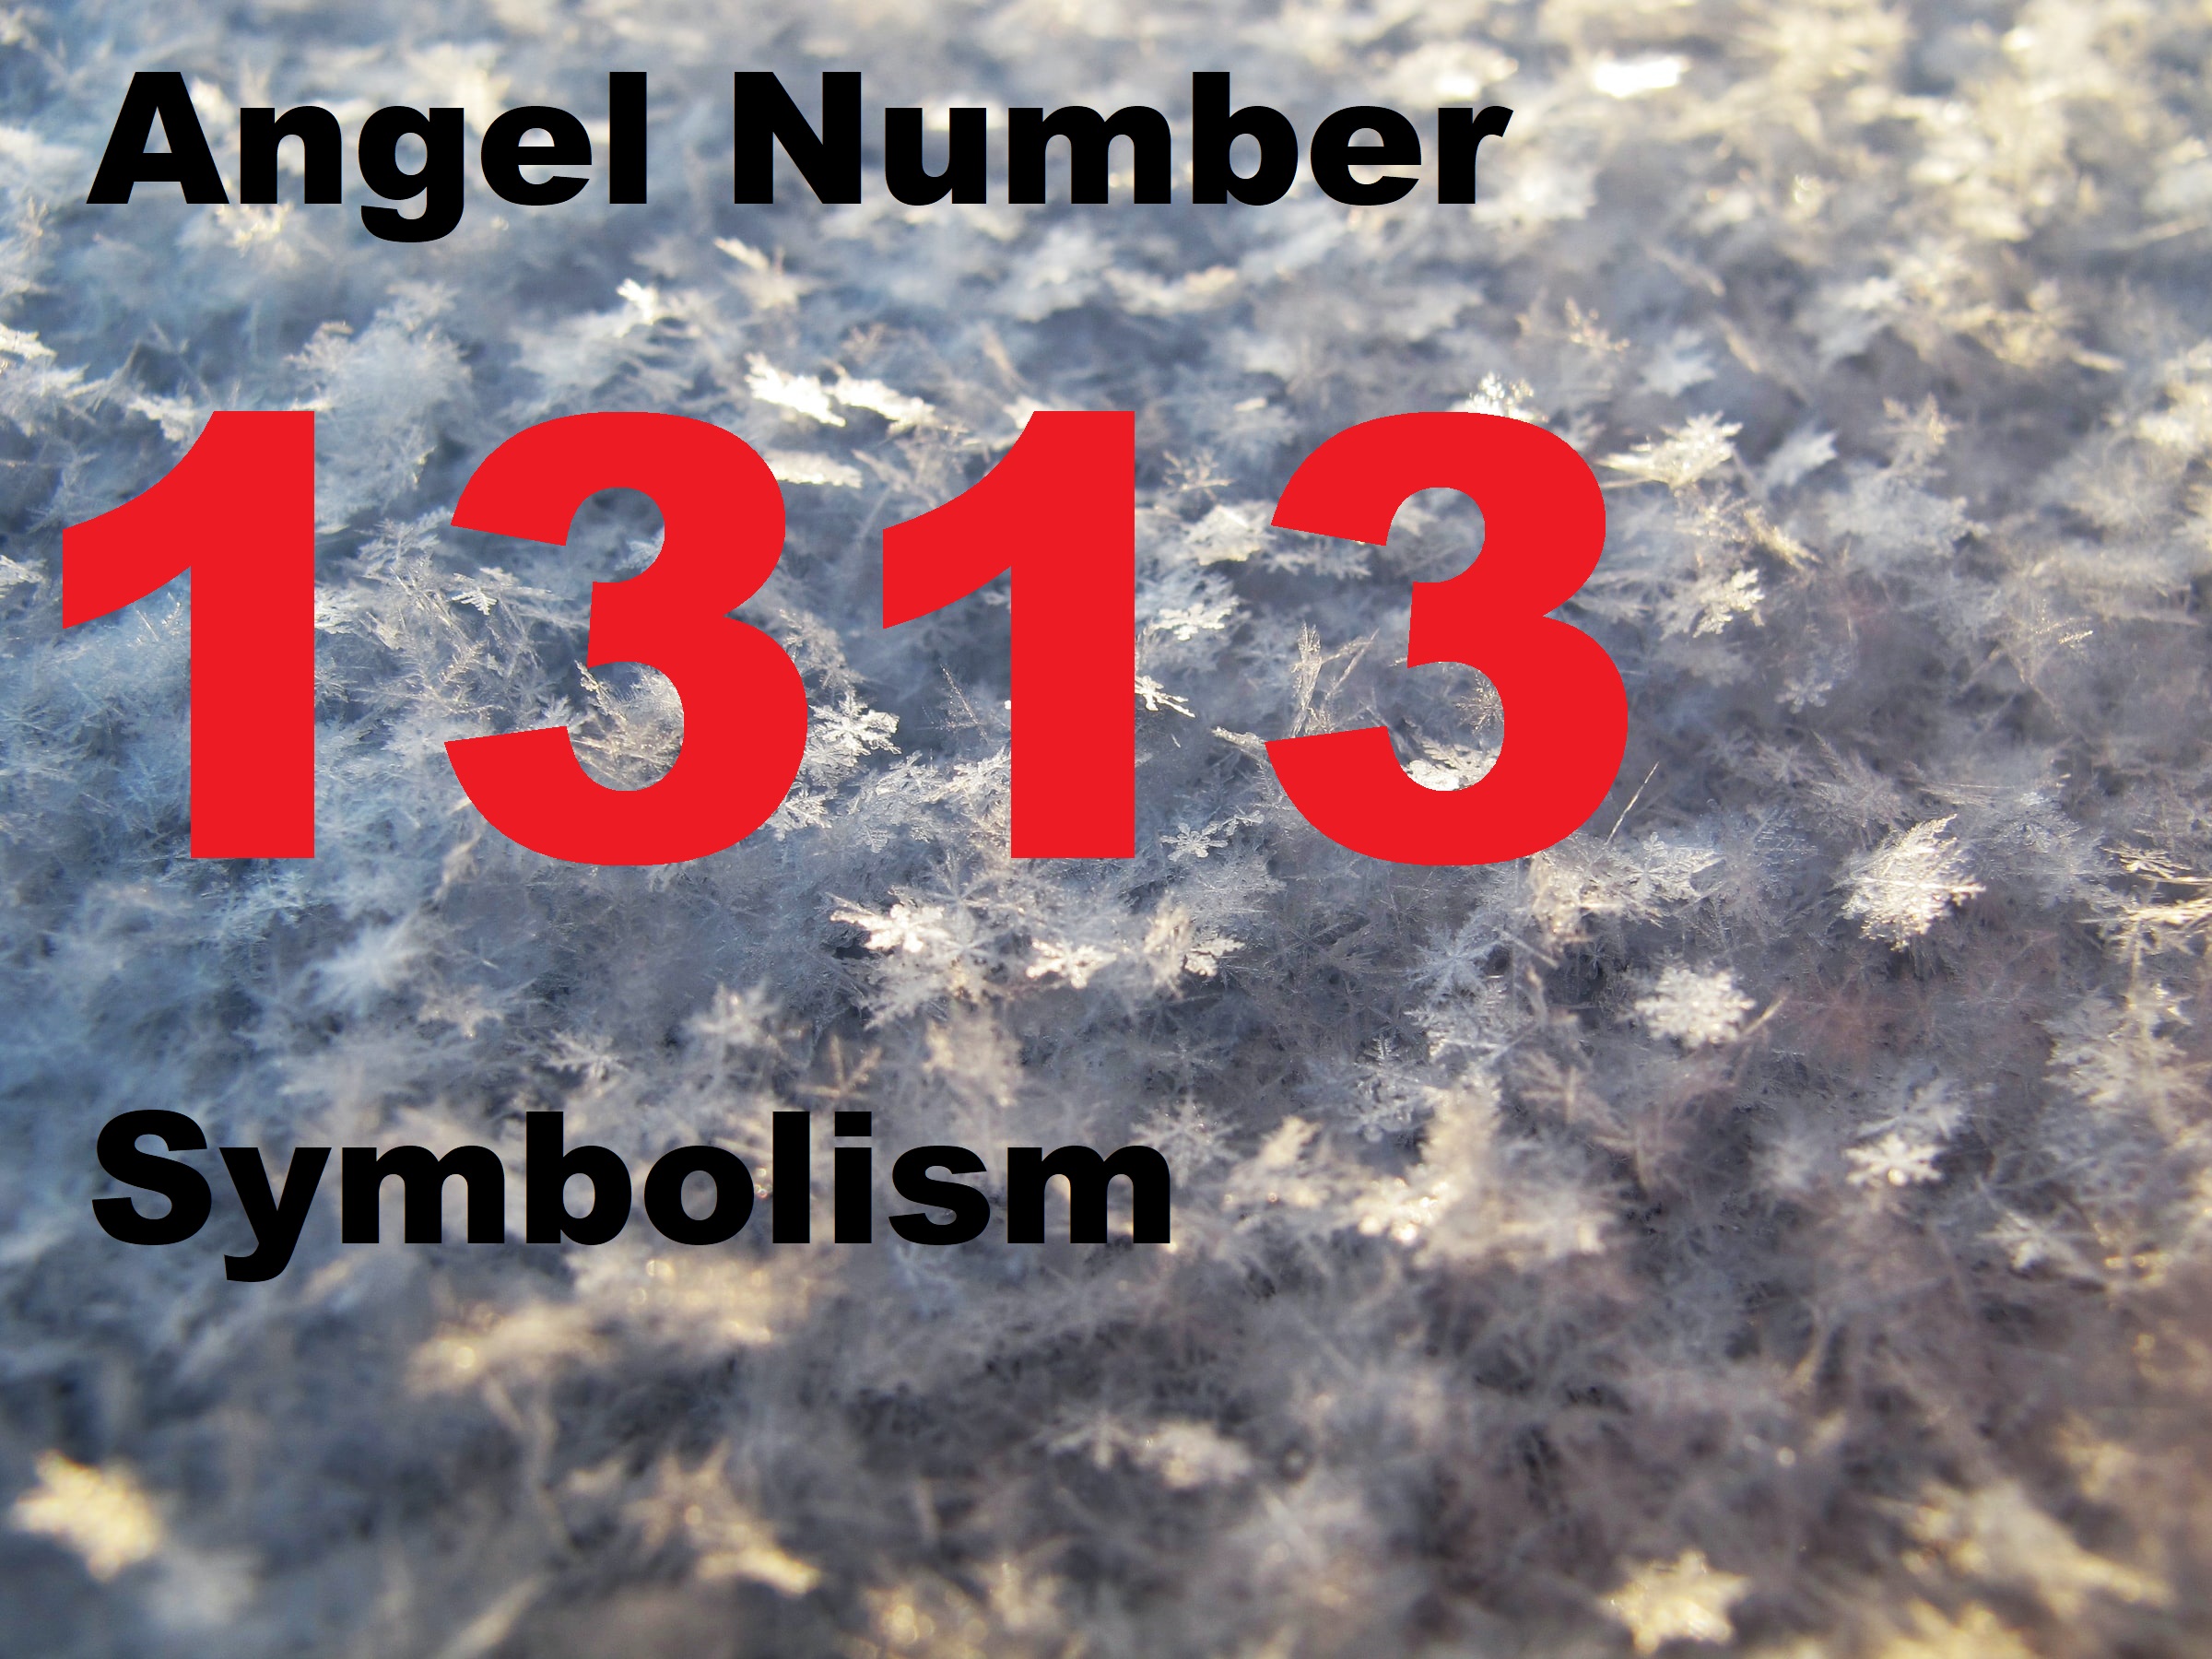 Angel Number 1313 Symbolism text in black and red font color